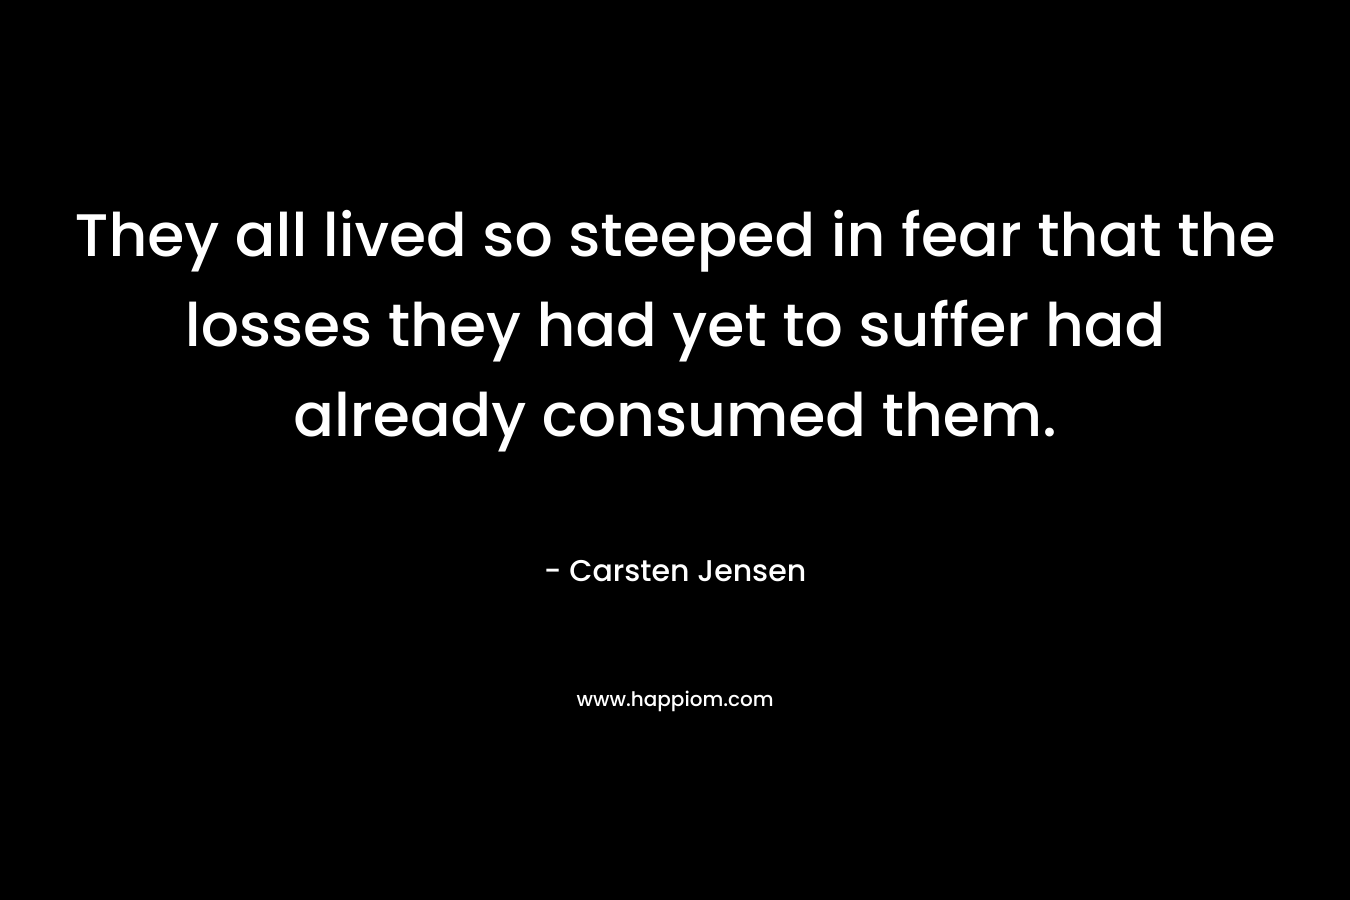 They all lived so steeped in fear that the losses they had yet to suffer had already consumed them.